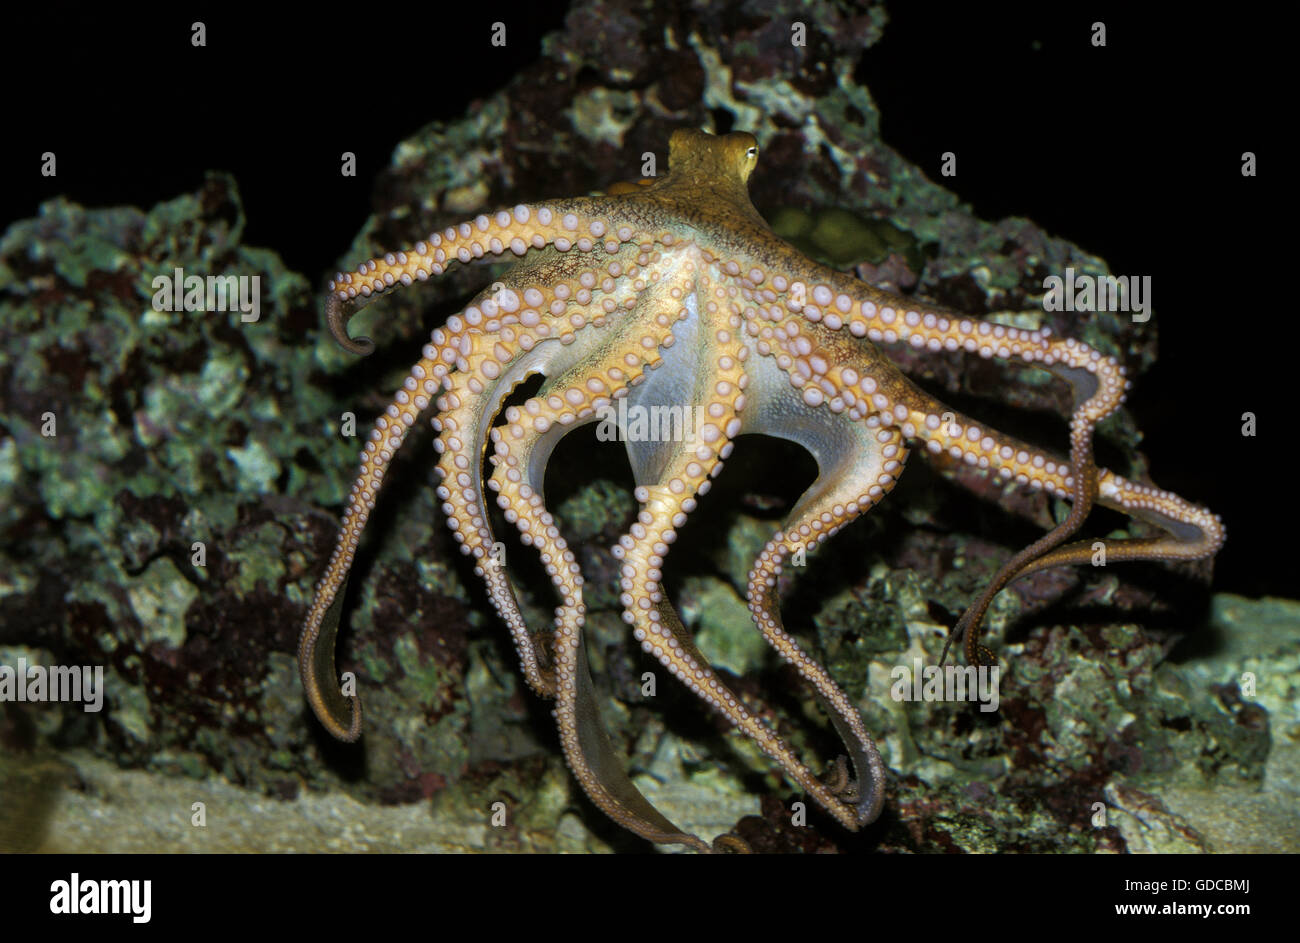 Octopus, octopus sp., Adult Swimming Showing Tentacles Stock Photo